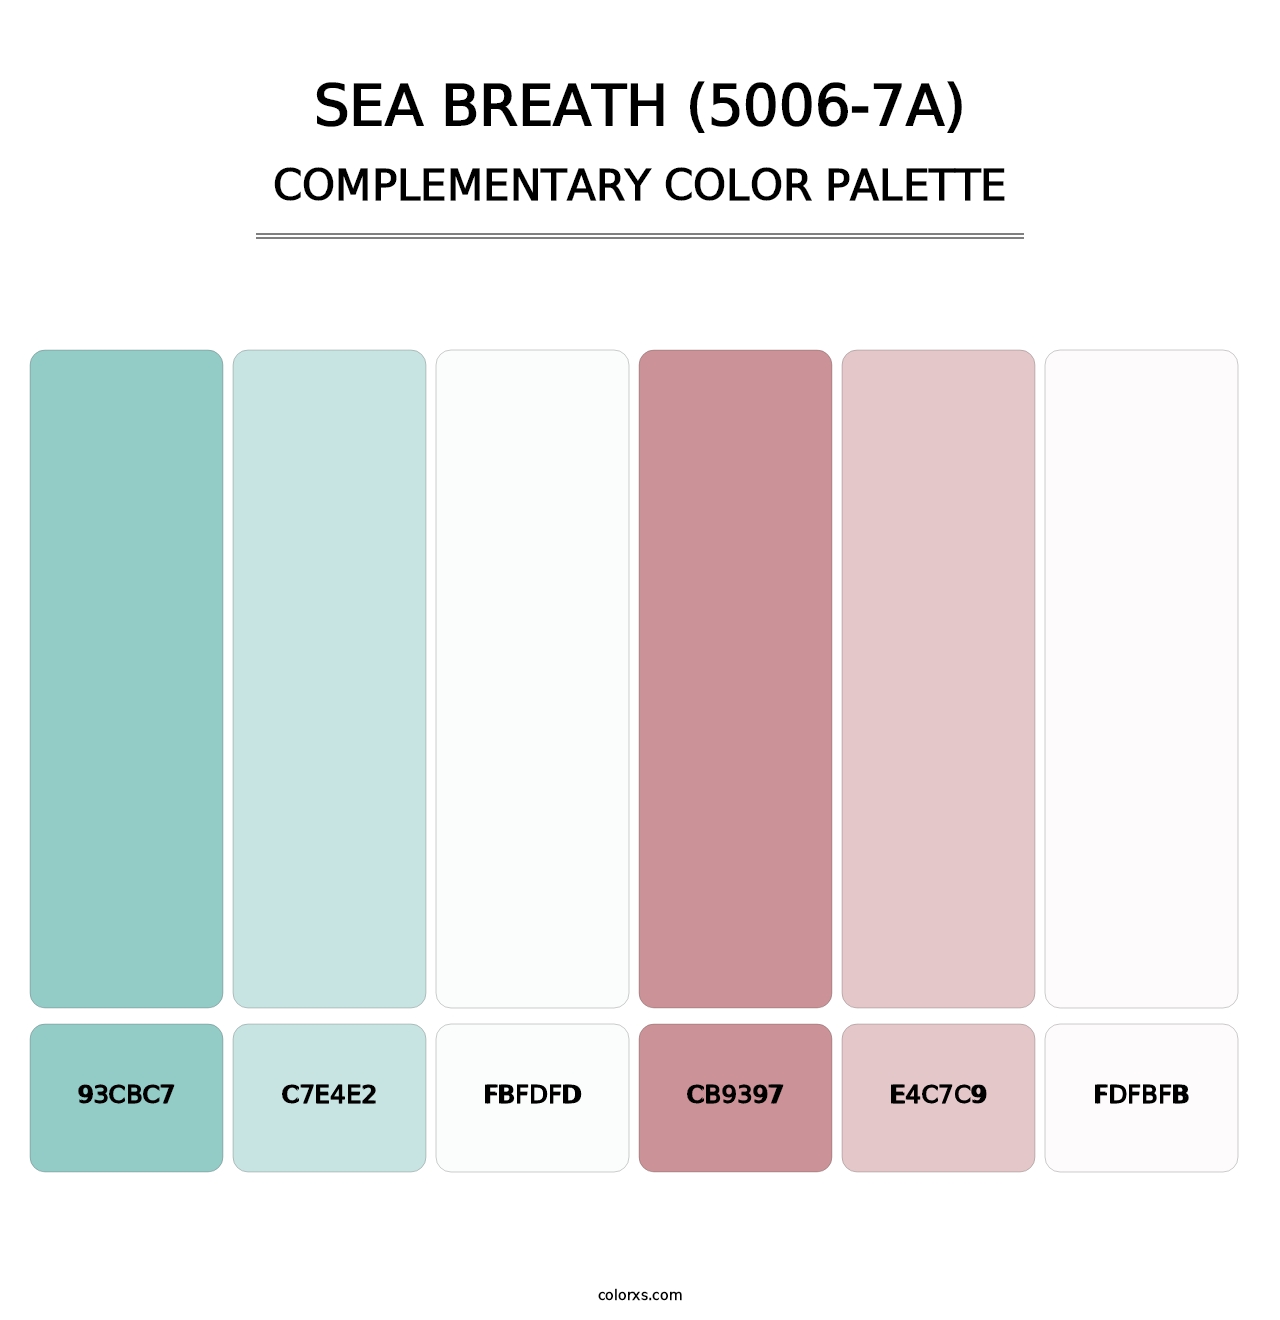 Sea Breath (5006-7A) - Complementary Color Palette